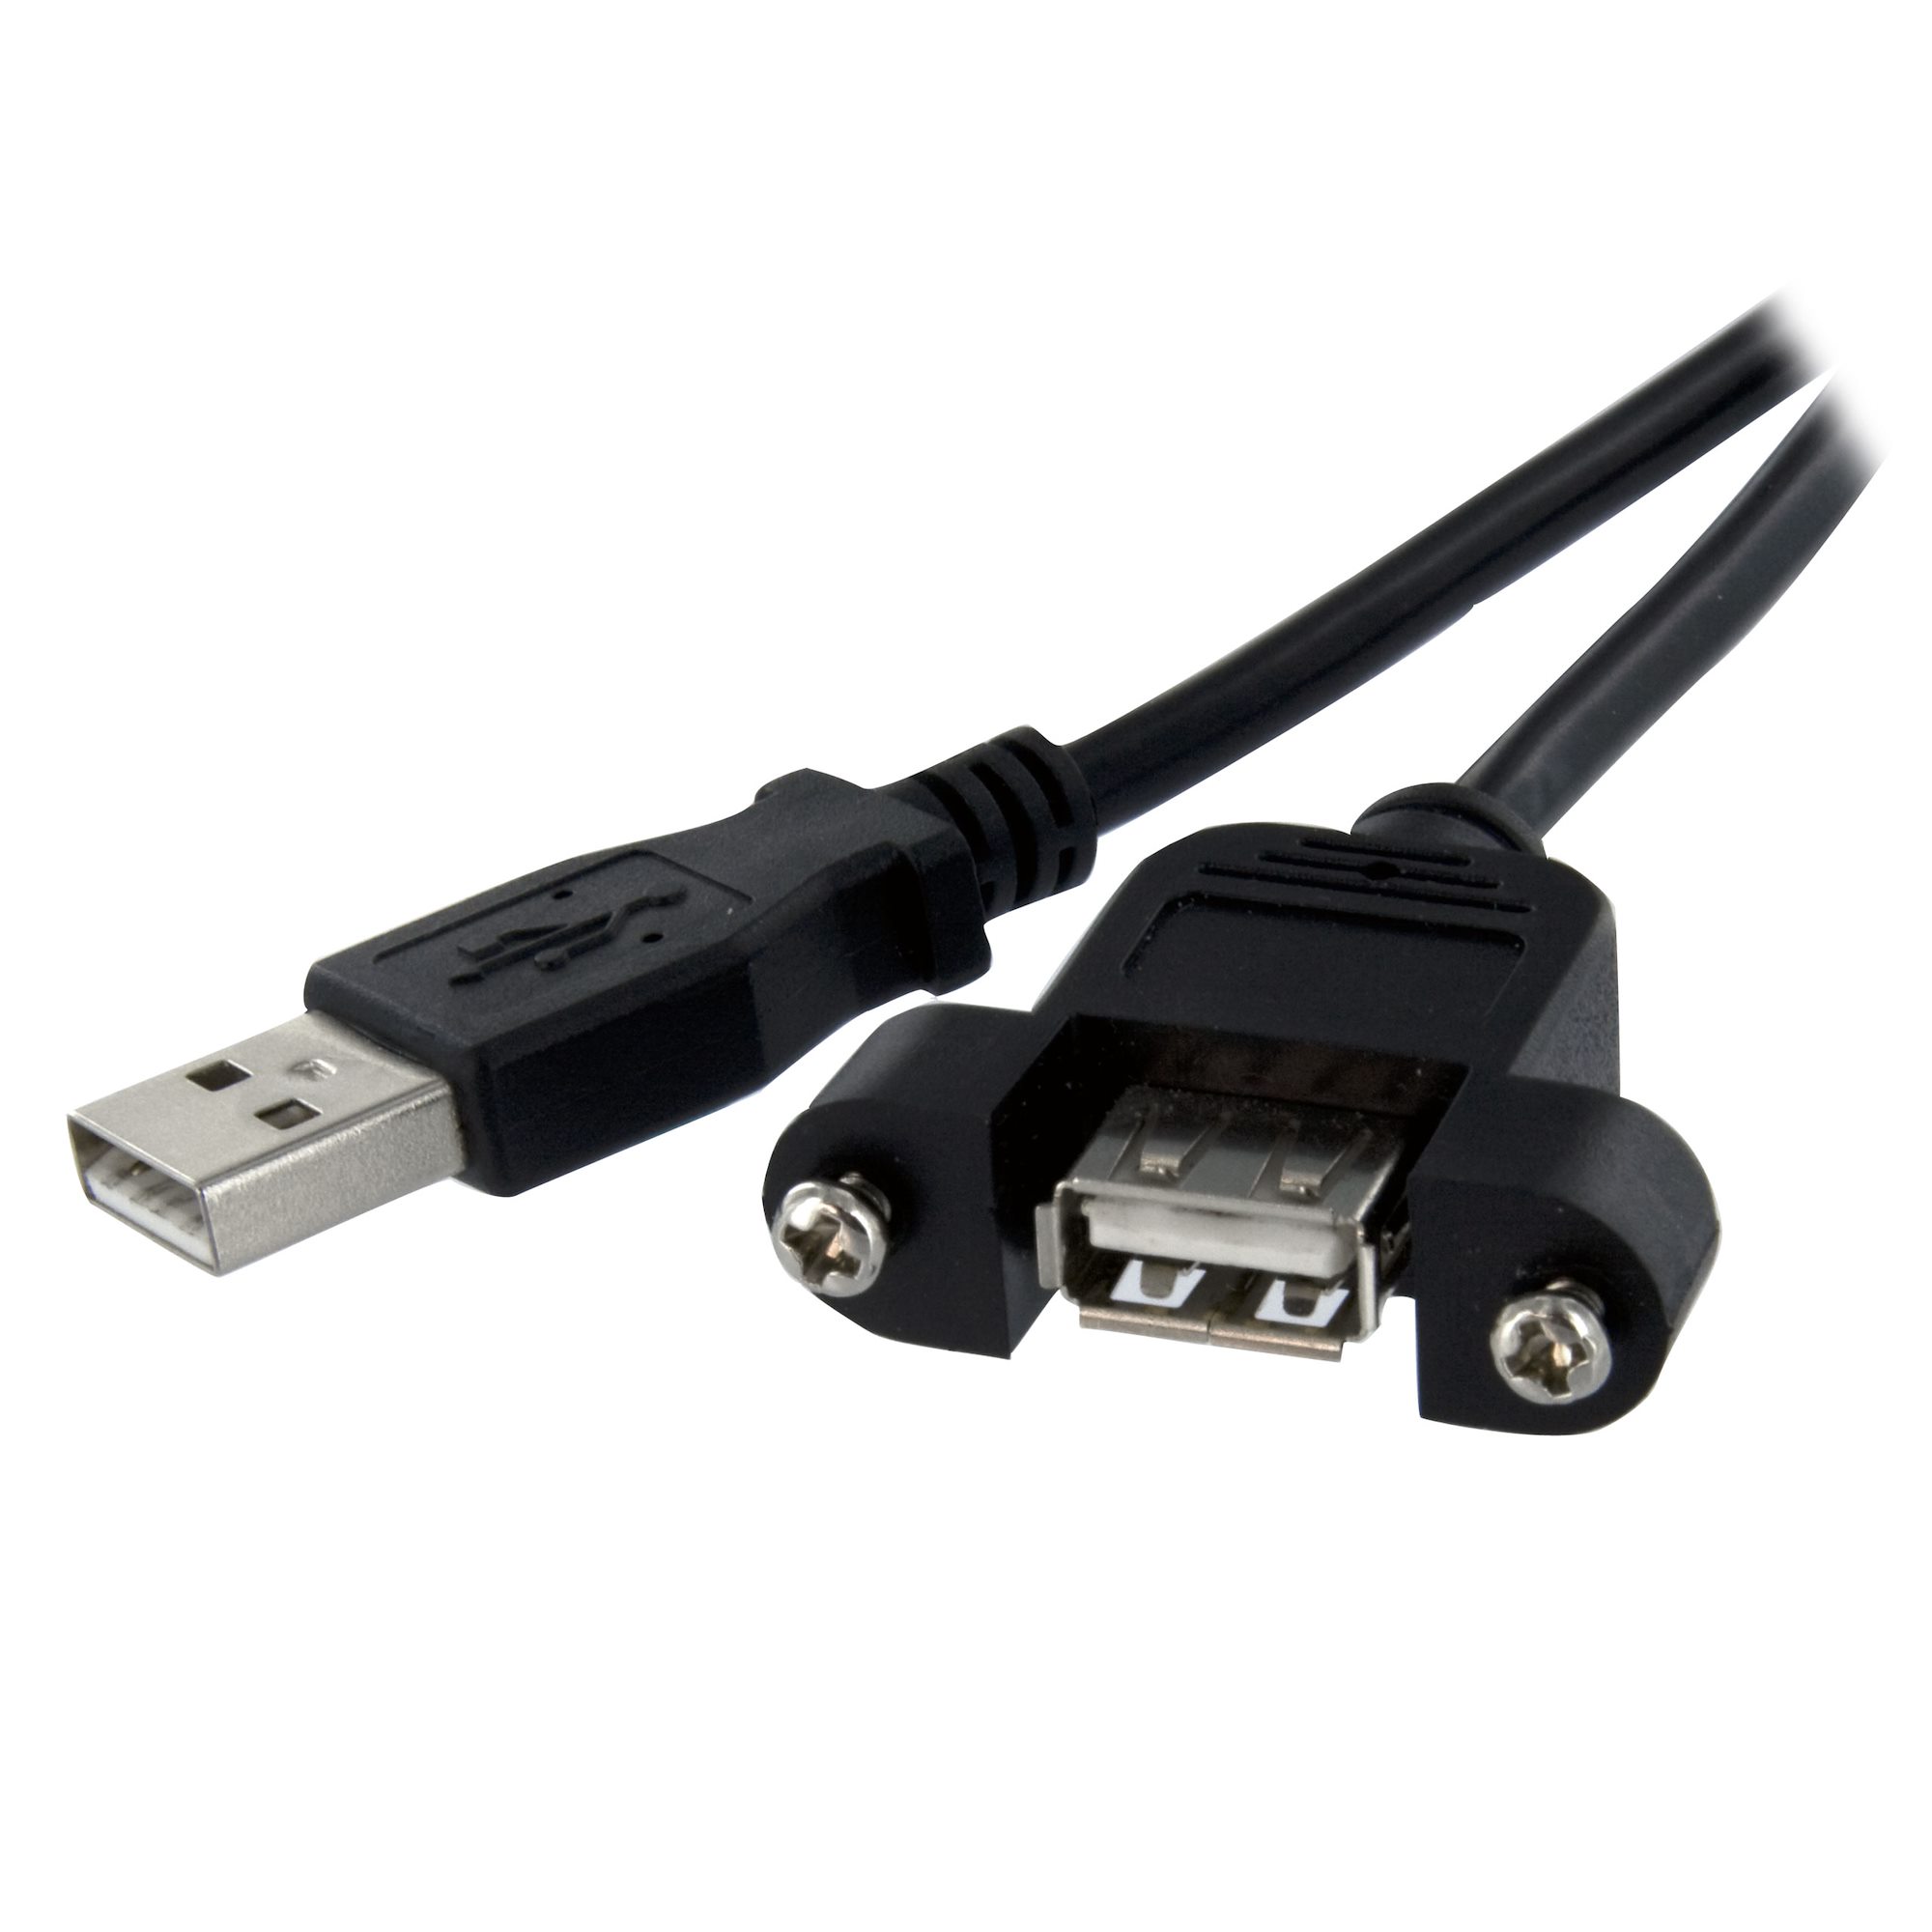 30cm Panel Mount USB Cable A to A - F/M - Internal USB Cables & Panel Mount USB  Cables, Cables